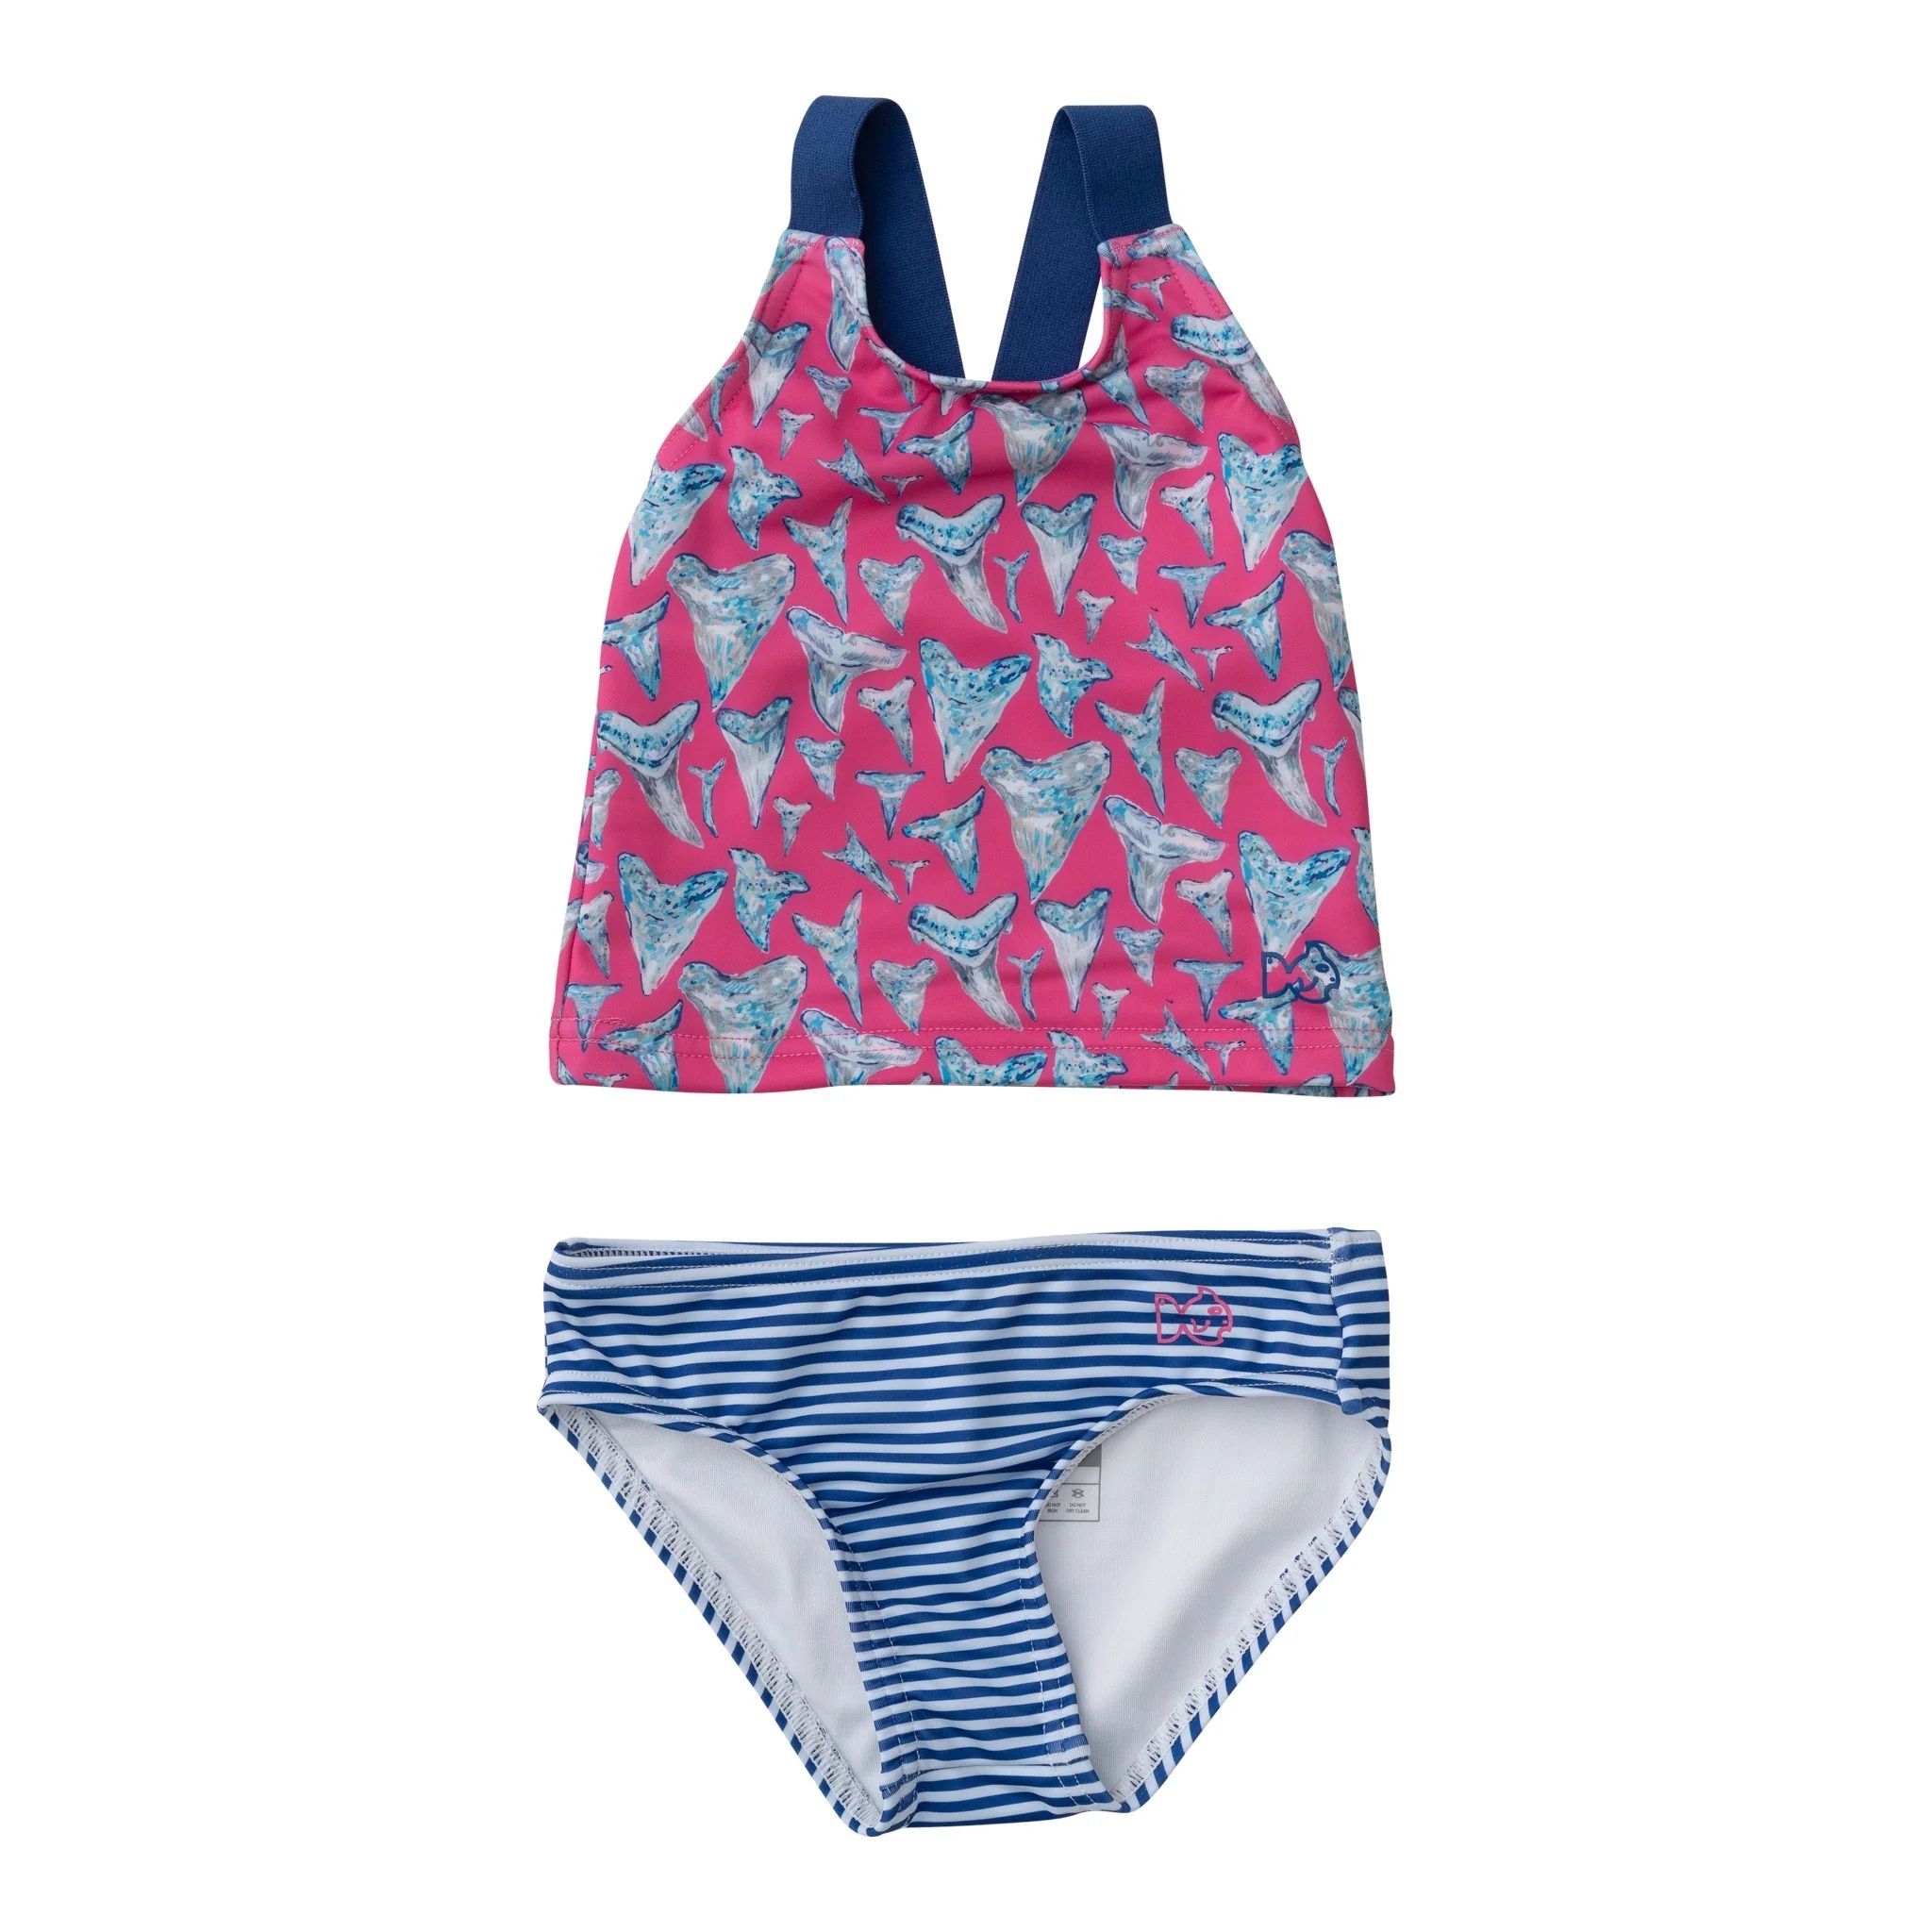 Tournament Time Tankini in Pink Sharks Tooth Print | PRODOH